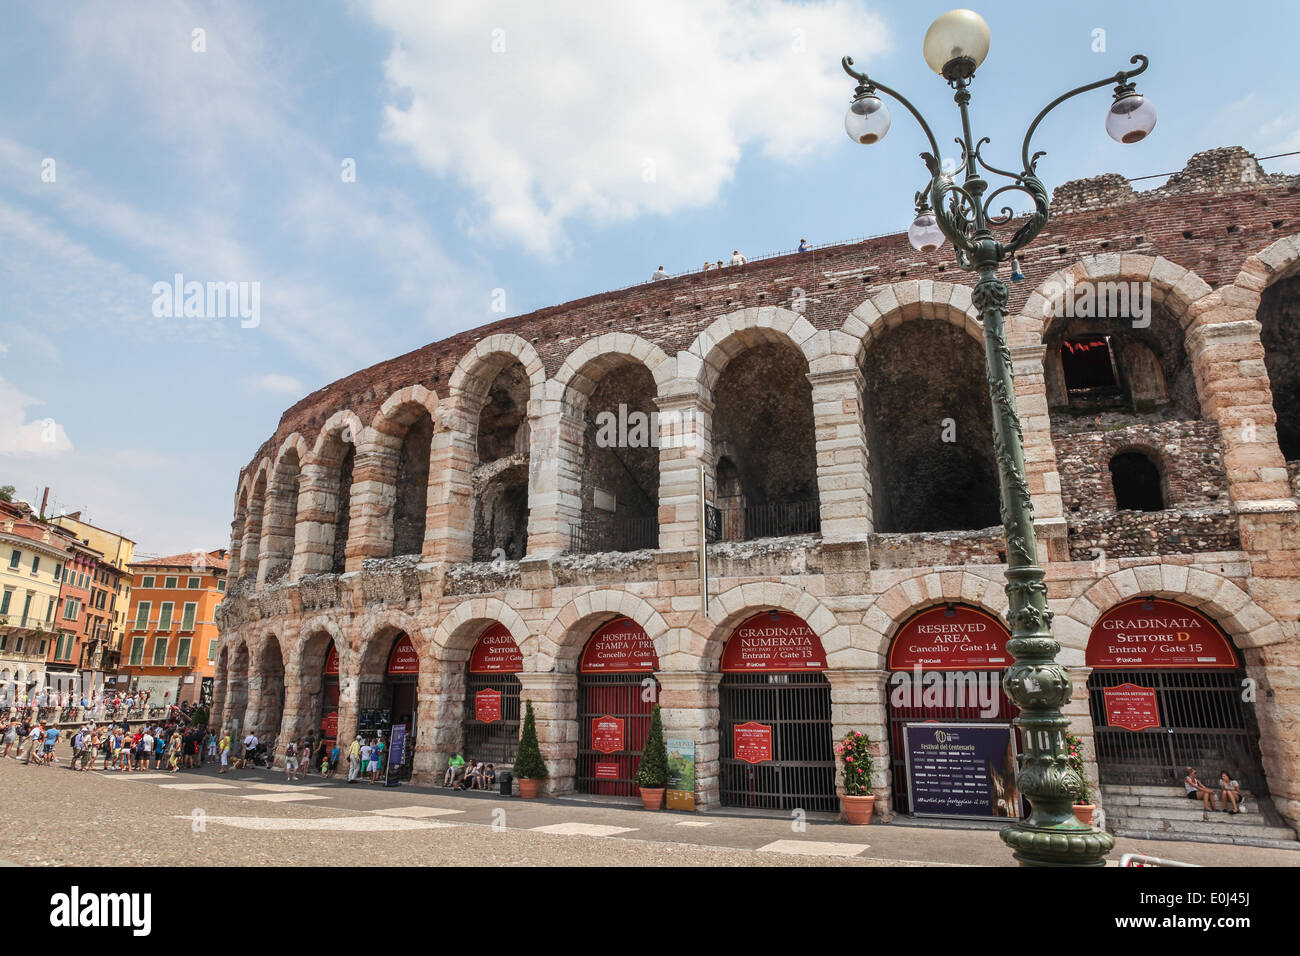 Verona Arena, famous Roman amphitheater on Piazza Bra in Verona, Italy,  with groups of tourists and surrounding buildings Stock Photo - Alamy